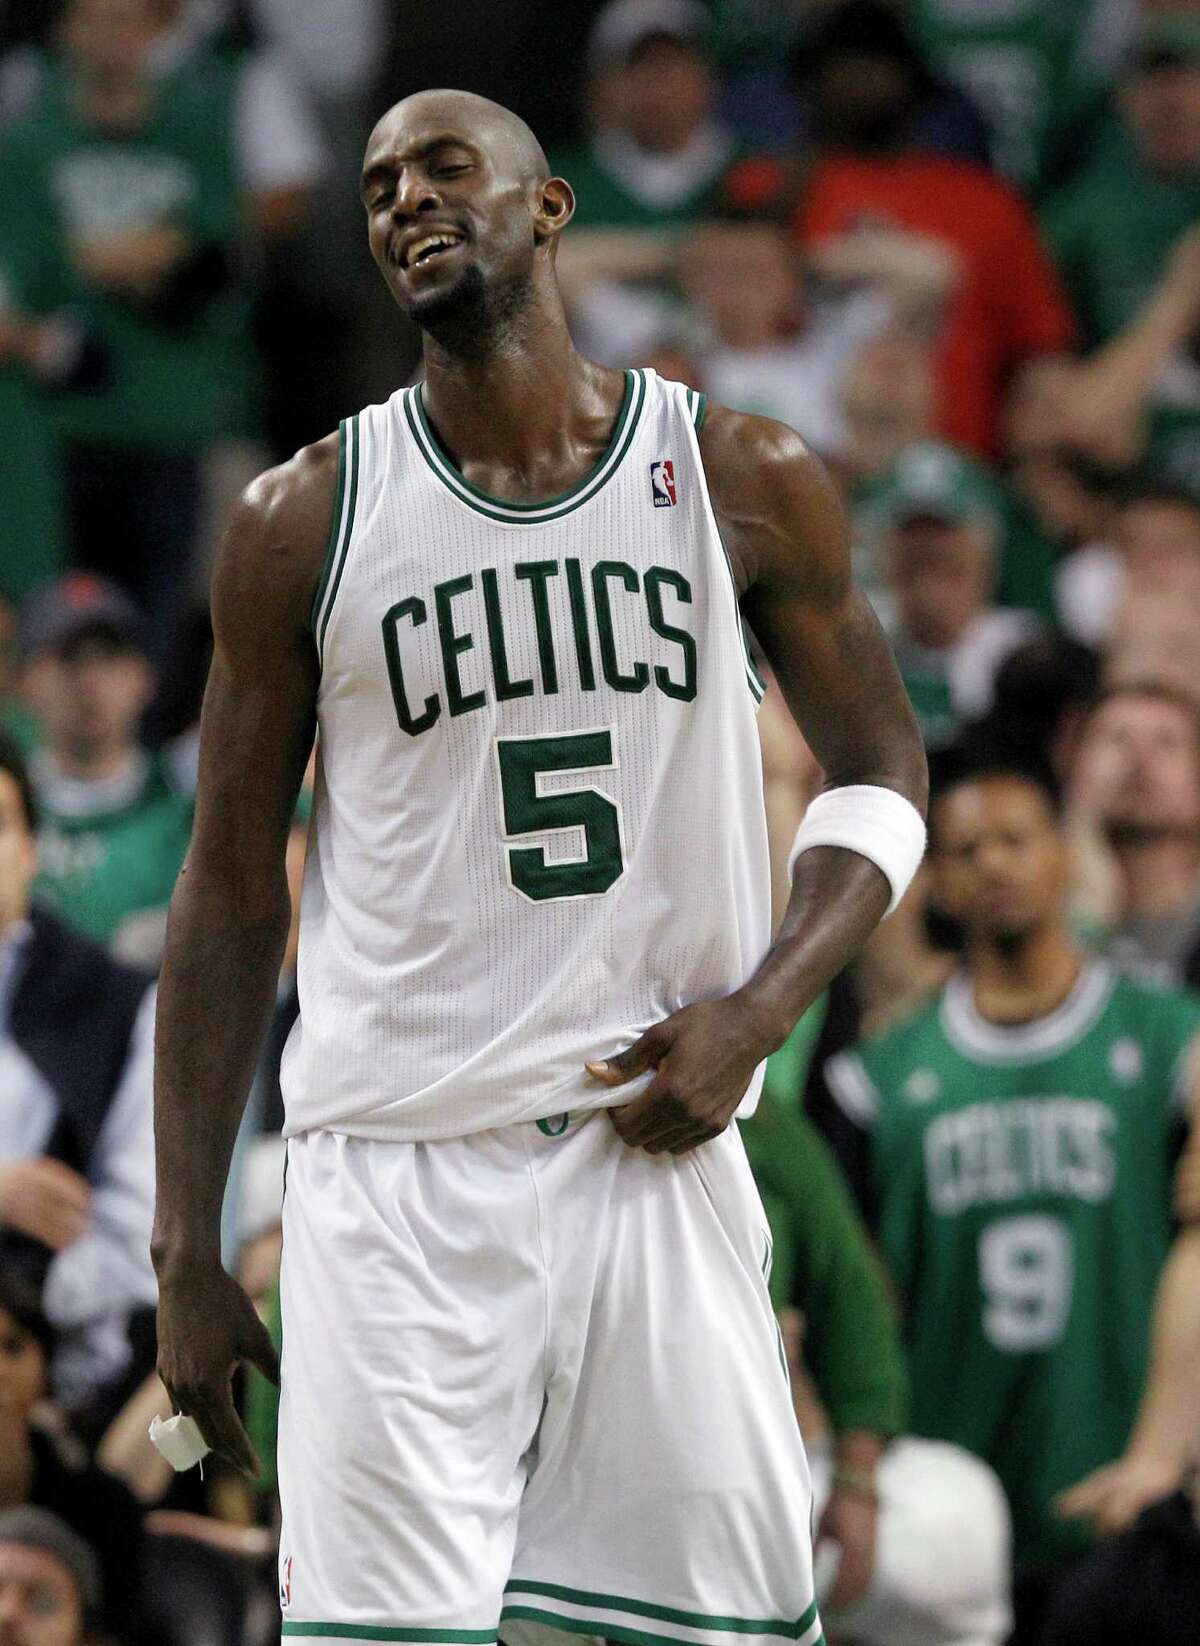 Boston Celtics forward Kevin Garnett reacts during the fourth quarter of Game 4 against the Miami Heat in their NBA basketball Eastern Conference finals playoff series in Boston Sunday, June 3, 2012. Boston won 93-91 in overtime. (AP Photo/Elise Amendola)